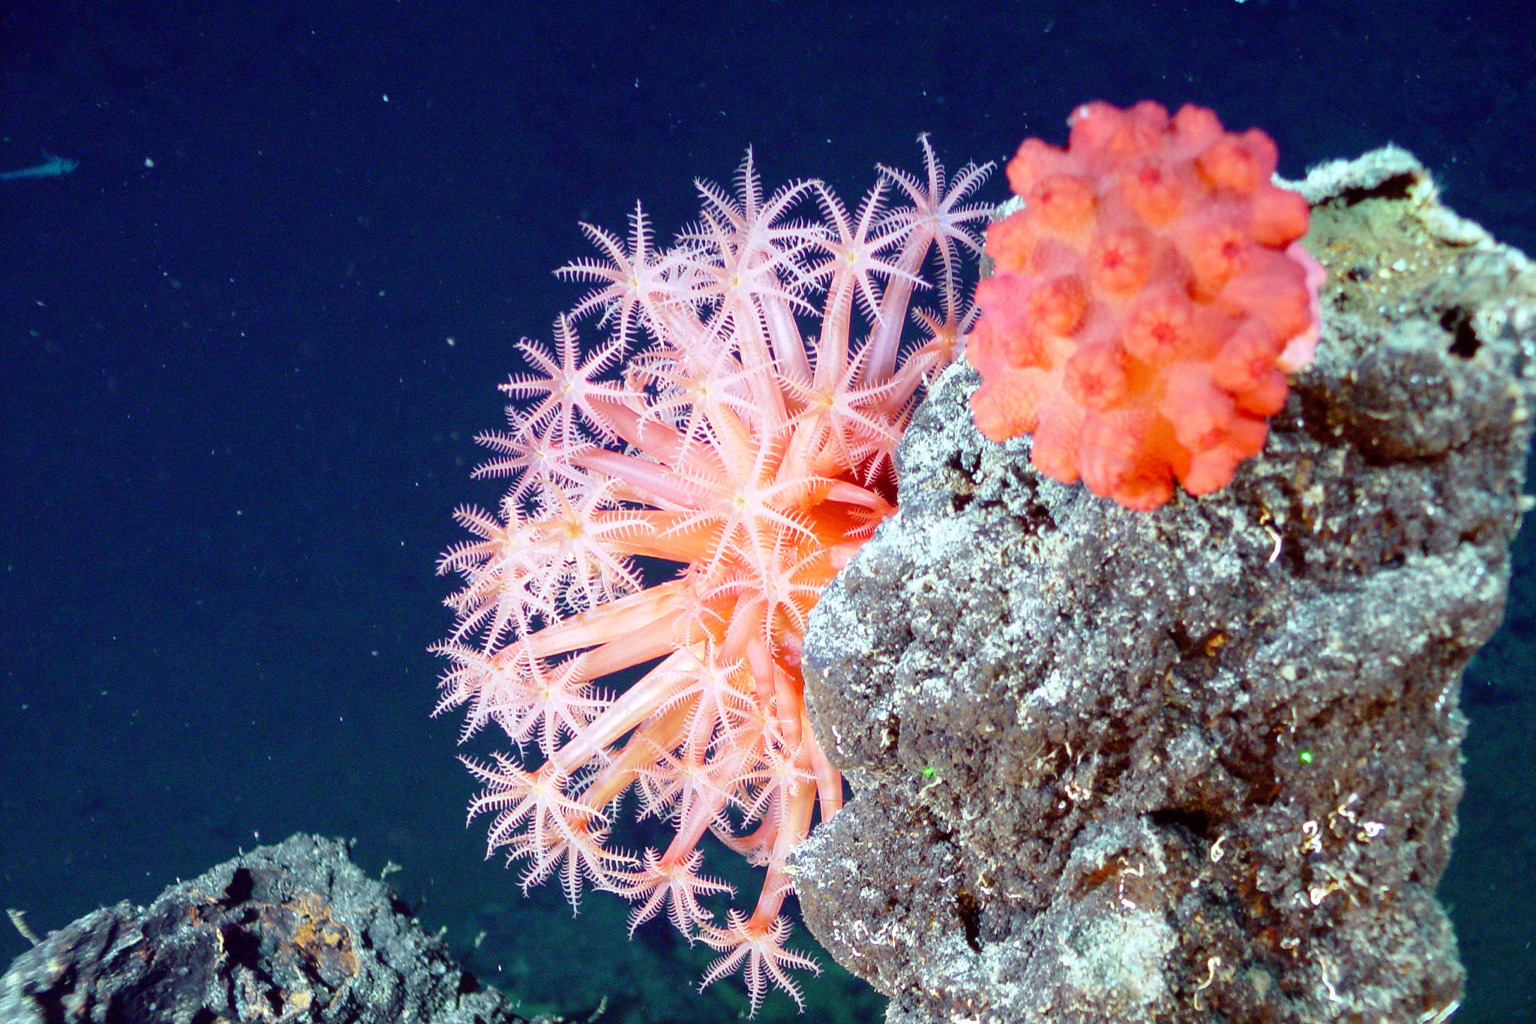 Cold water corals in the deep sea.